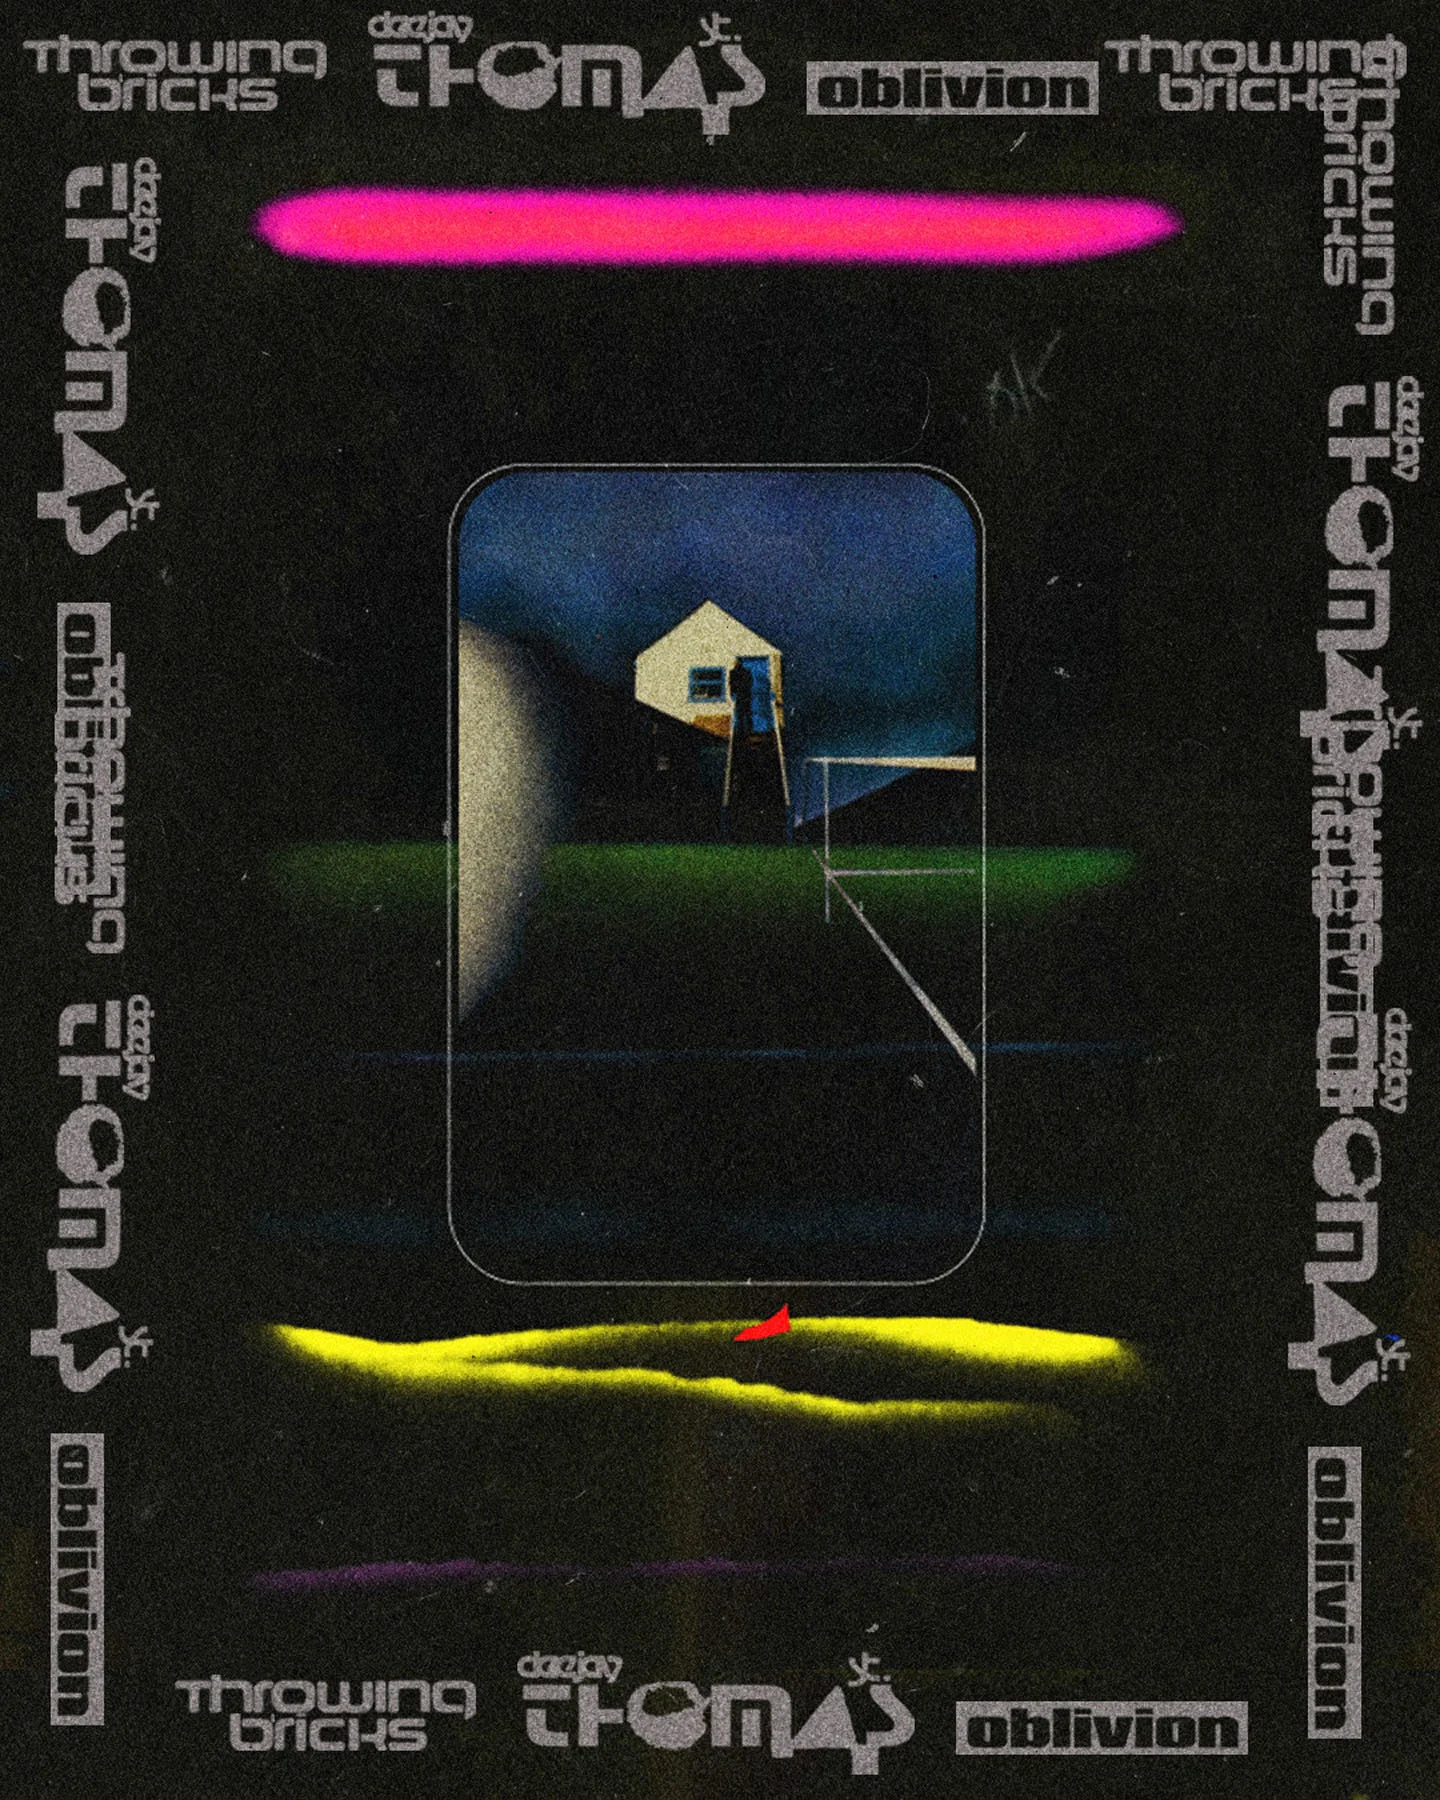 Airbrush painting featuring a central image of a house at night, illuminated by a streetlight, with a surreal neon pink halo above. The background and borders contain repeated text "throwing bricks" and "oblivion" in a dark, glitchy style.